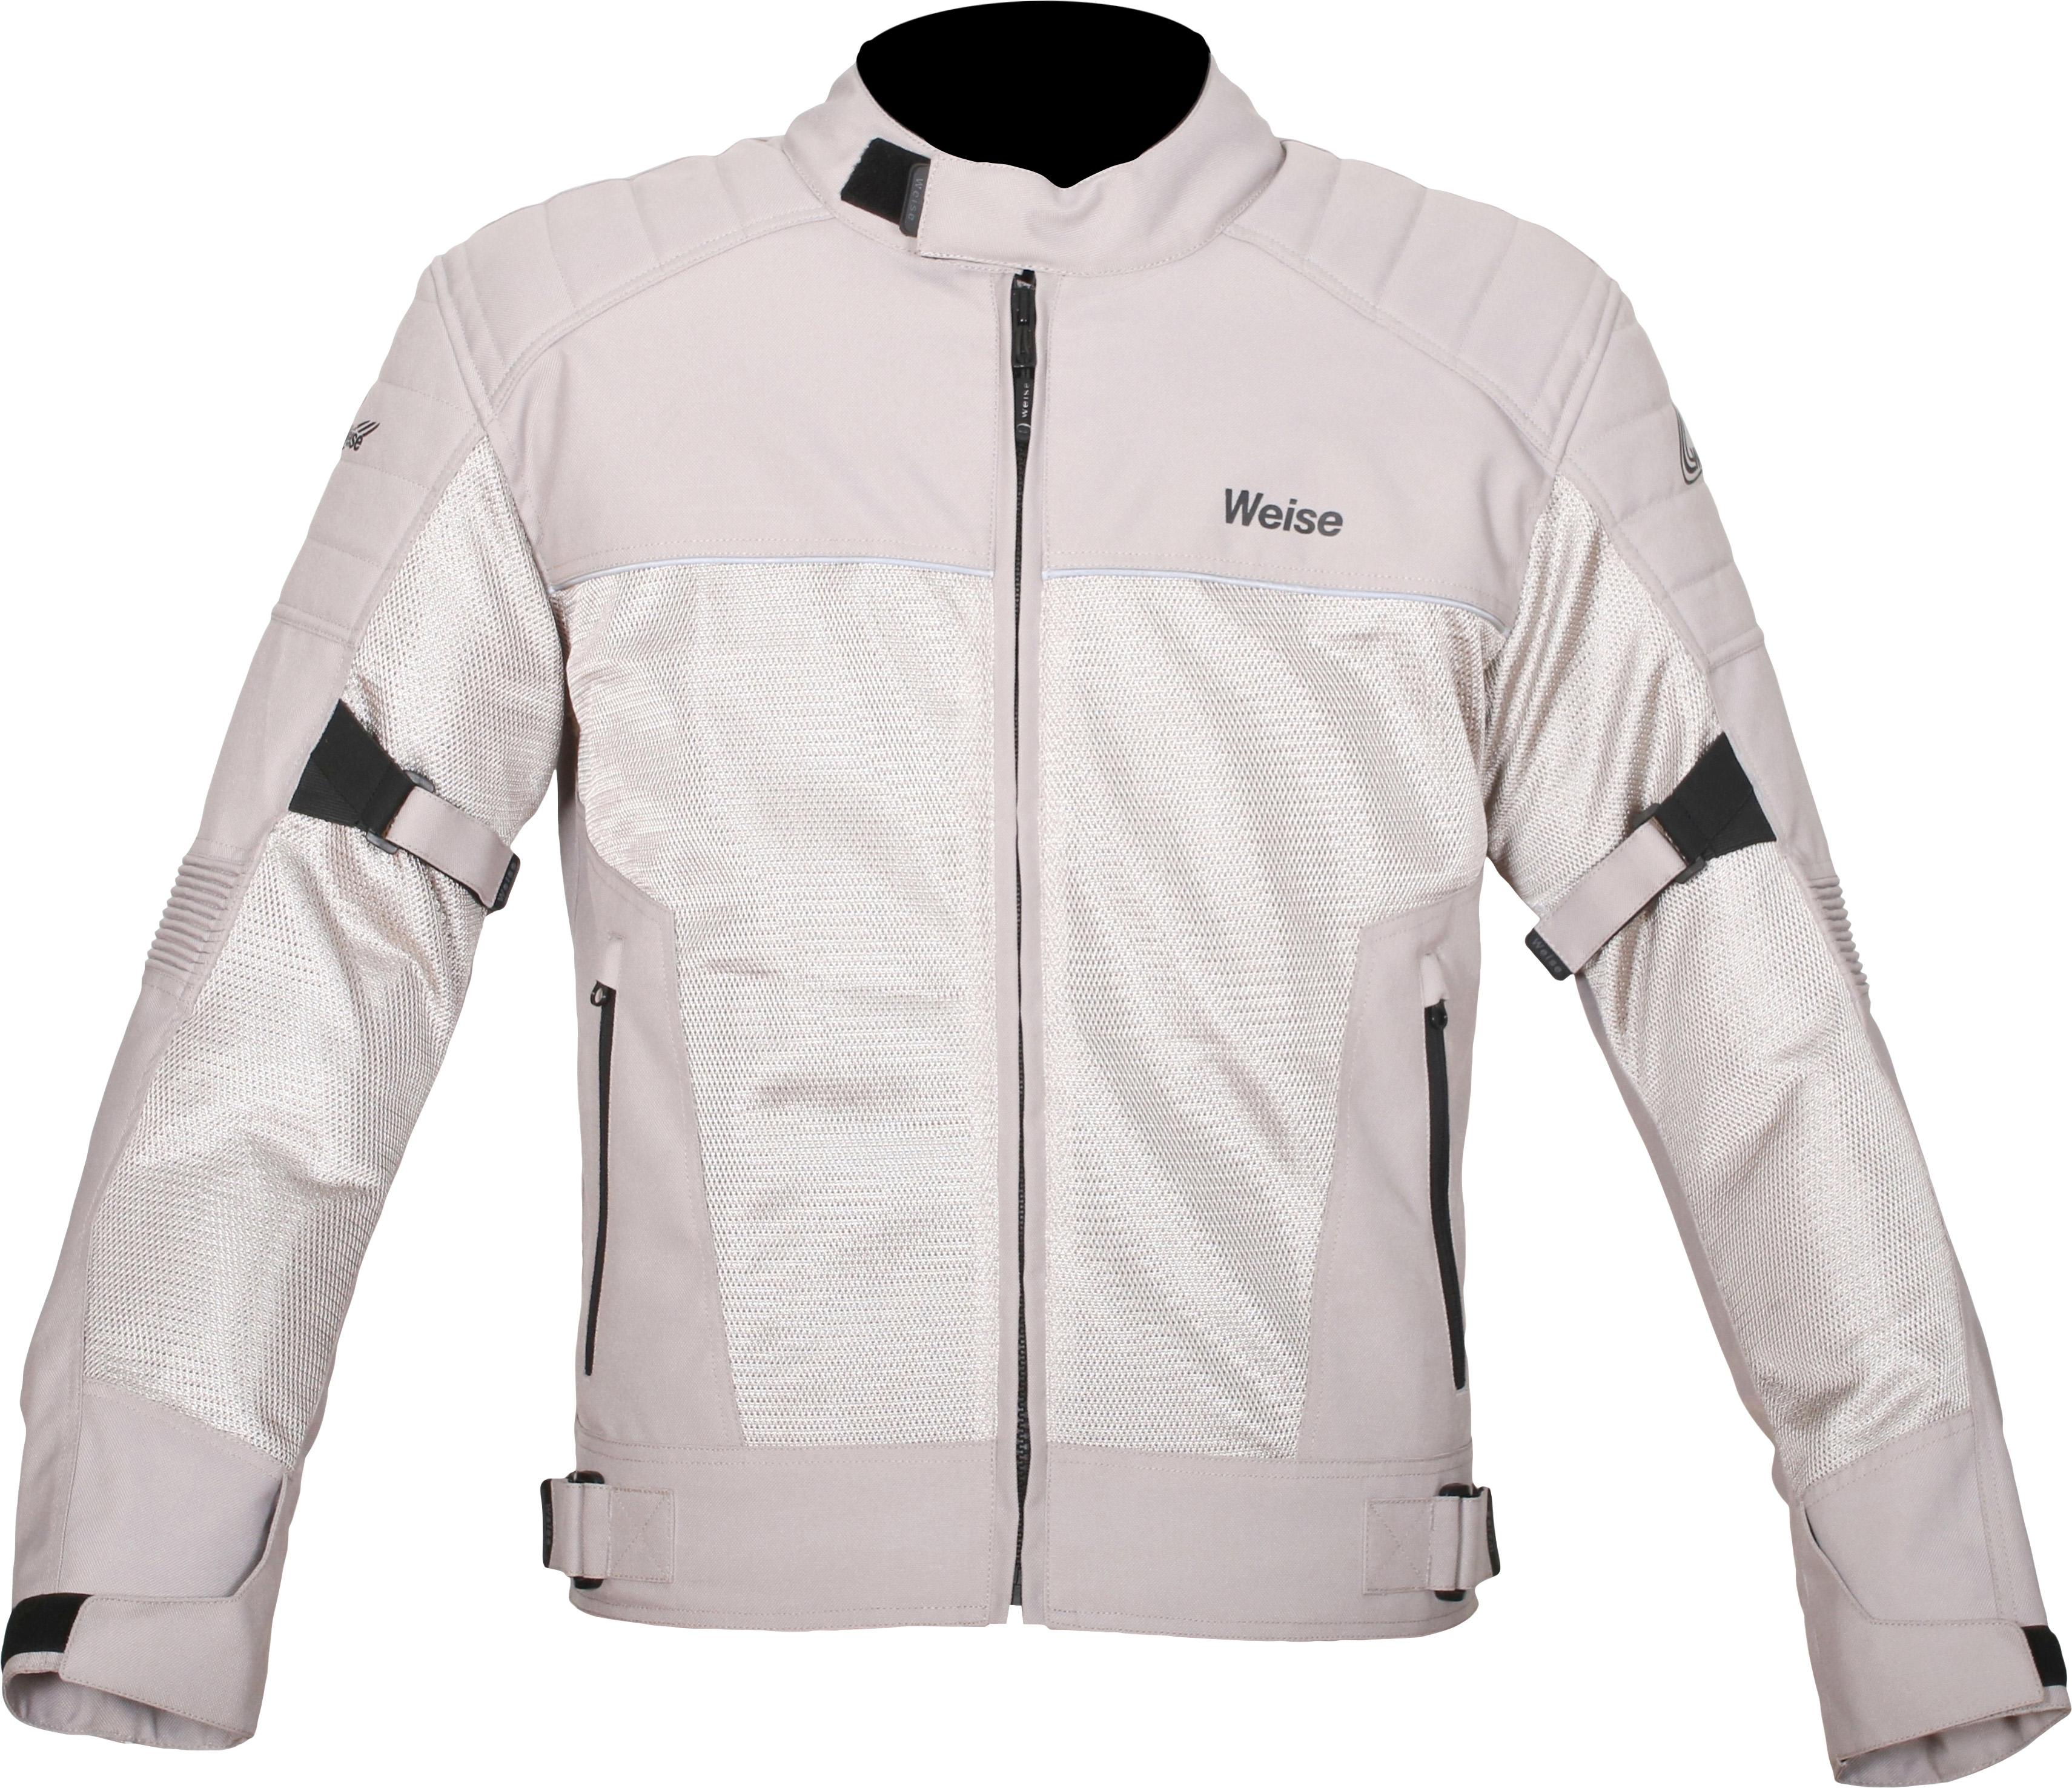 Weise Scout Motorcycle Jacket - Stone, 2Xl